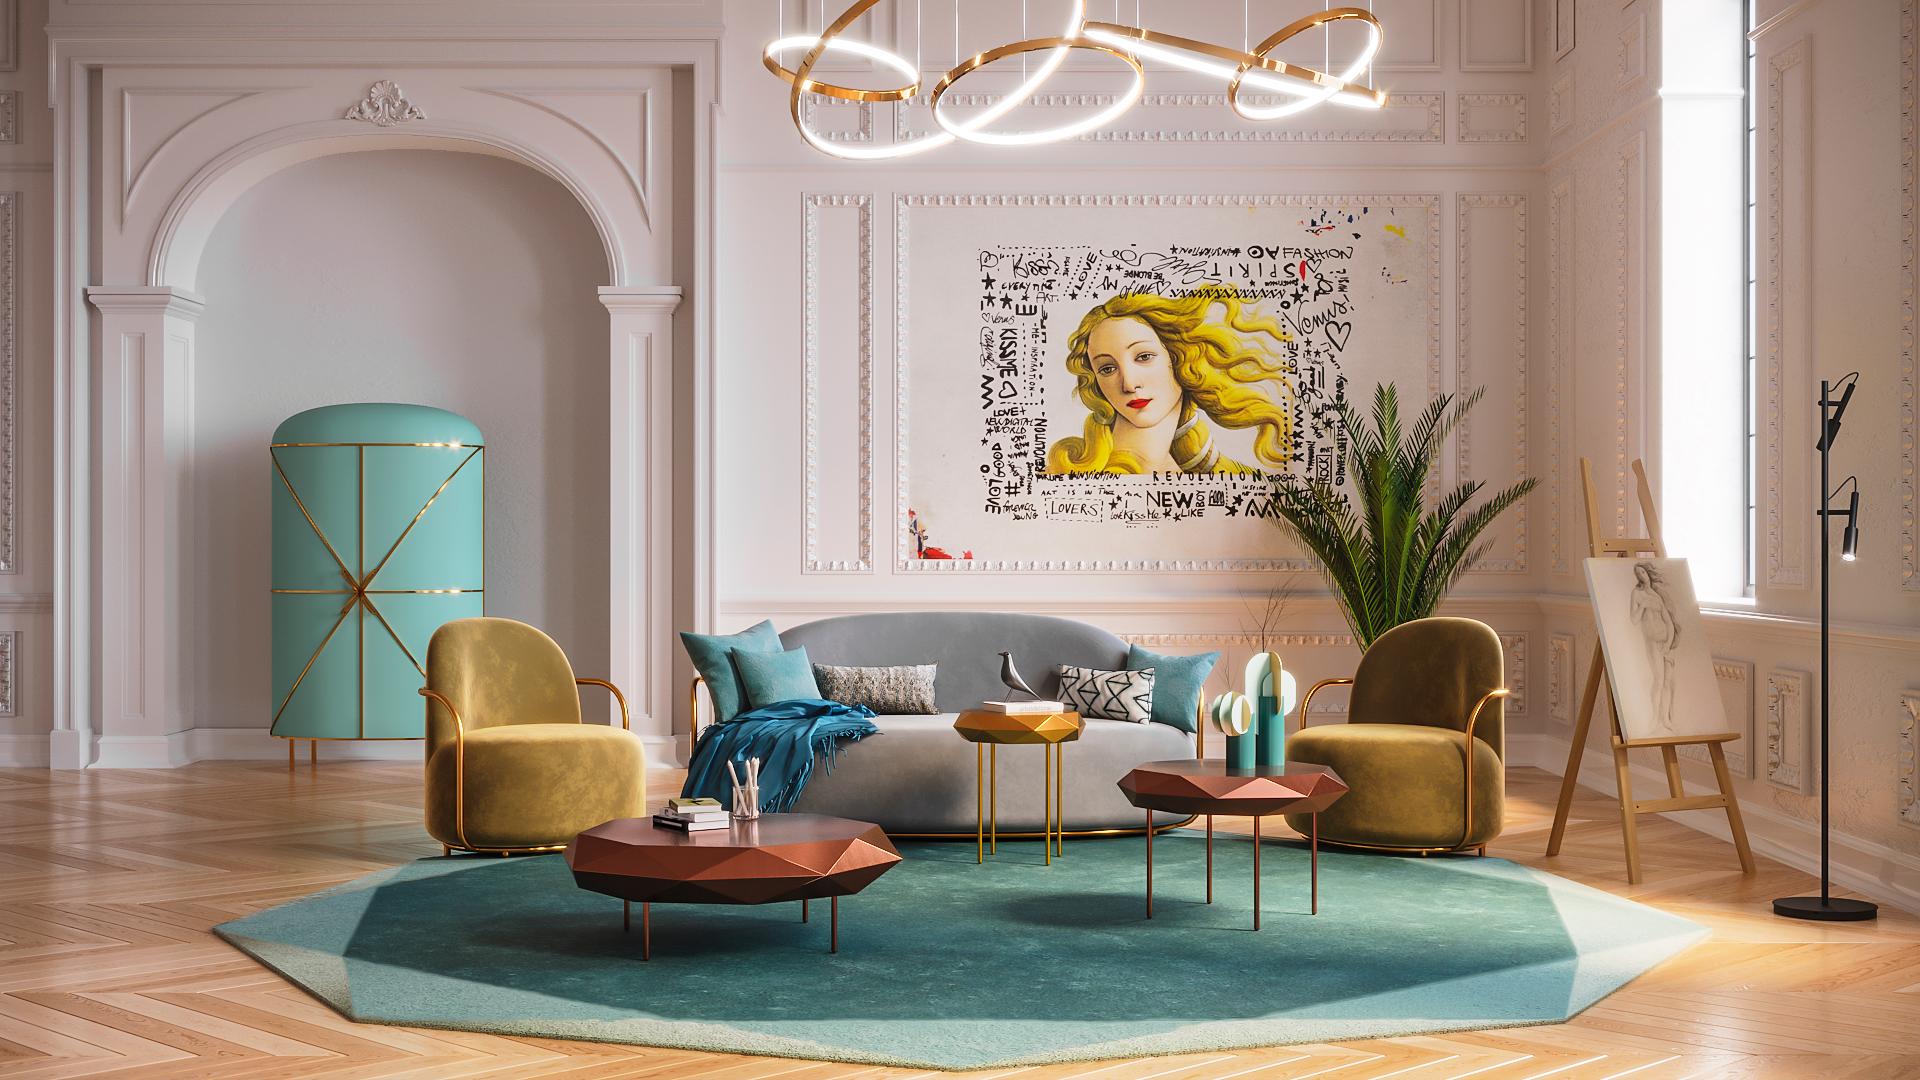 Stella Small Coffee Table Gold by Nika Zupanc is available in gold or rose gold, circular with a starry edge, delightful in any interior space. It's small in size but never unnoticed!

Nika Zupanc, a strikingly renowned Slovenian designer, never